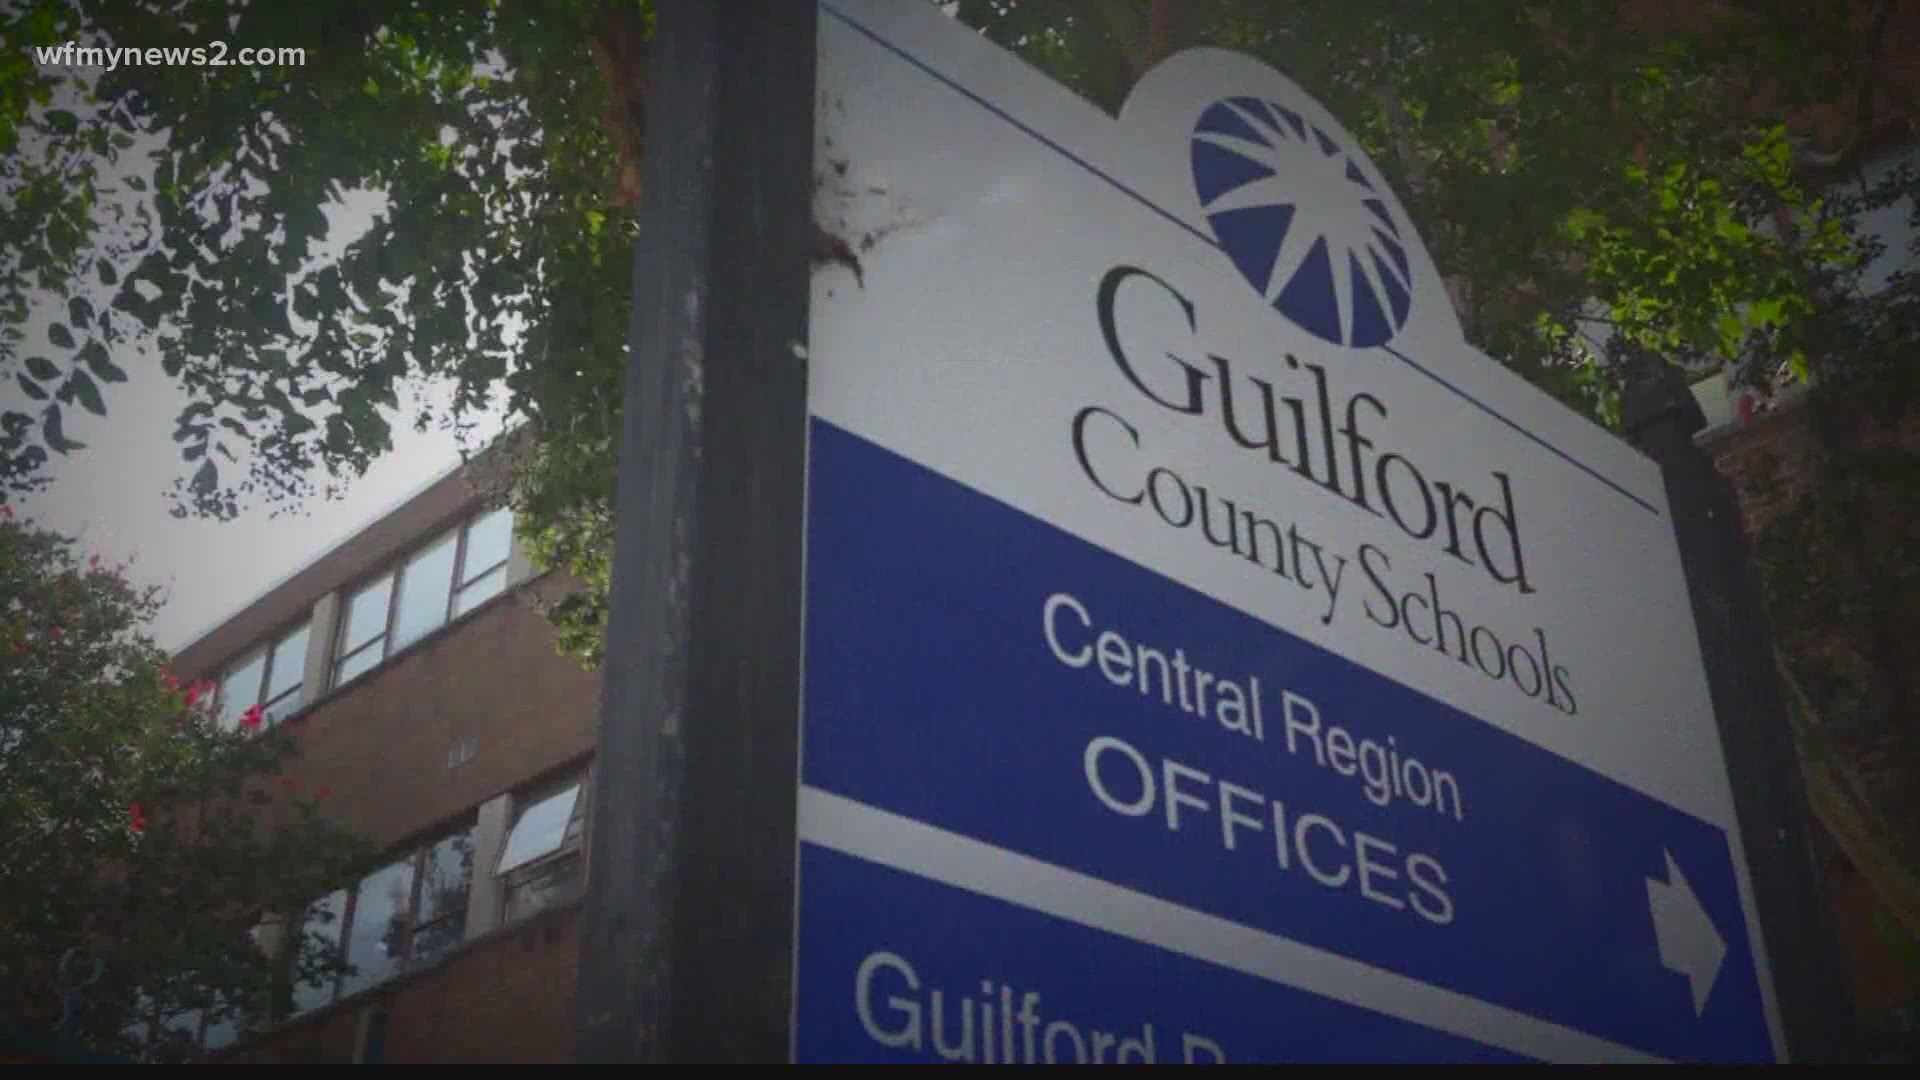 Guilford County Schools says the pandemic has slowed its ability to get remote learning equipment for students. The time frame has some parents concerned.